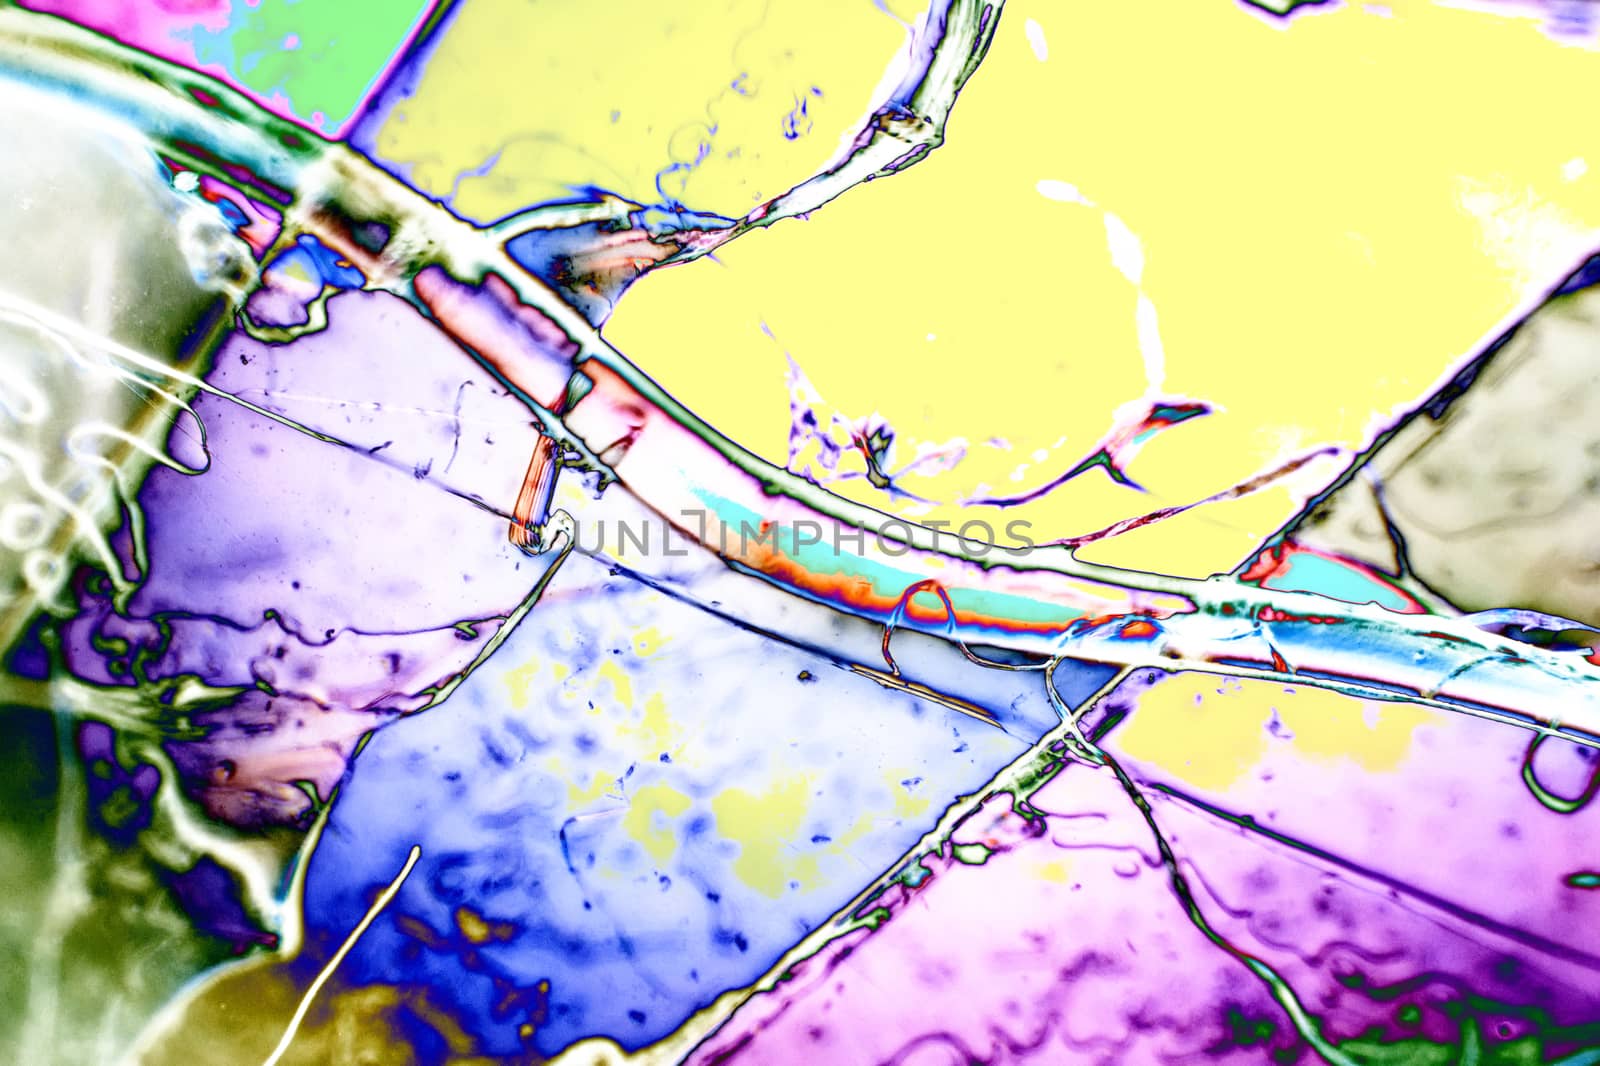 Light Graphics: Microphoto of translucent structures in polarized light